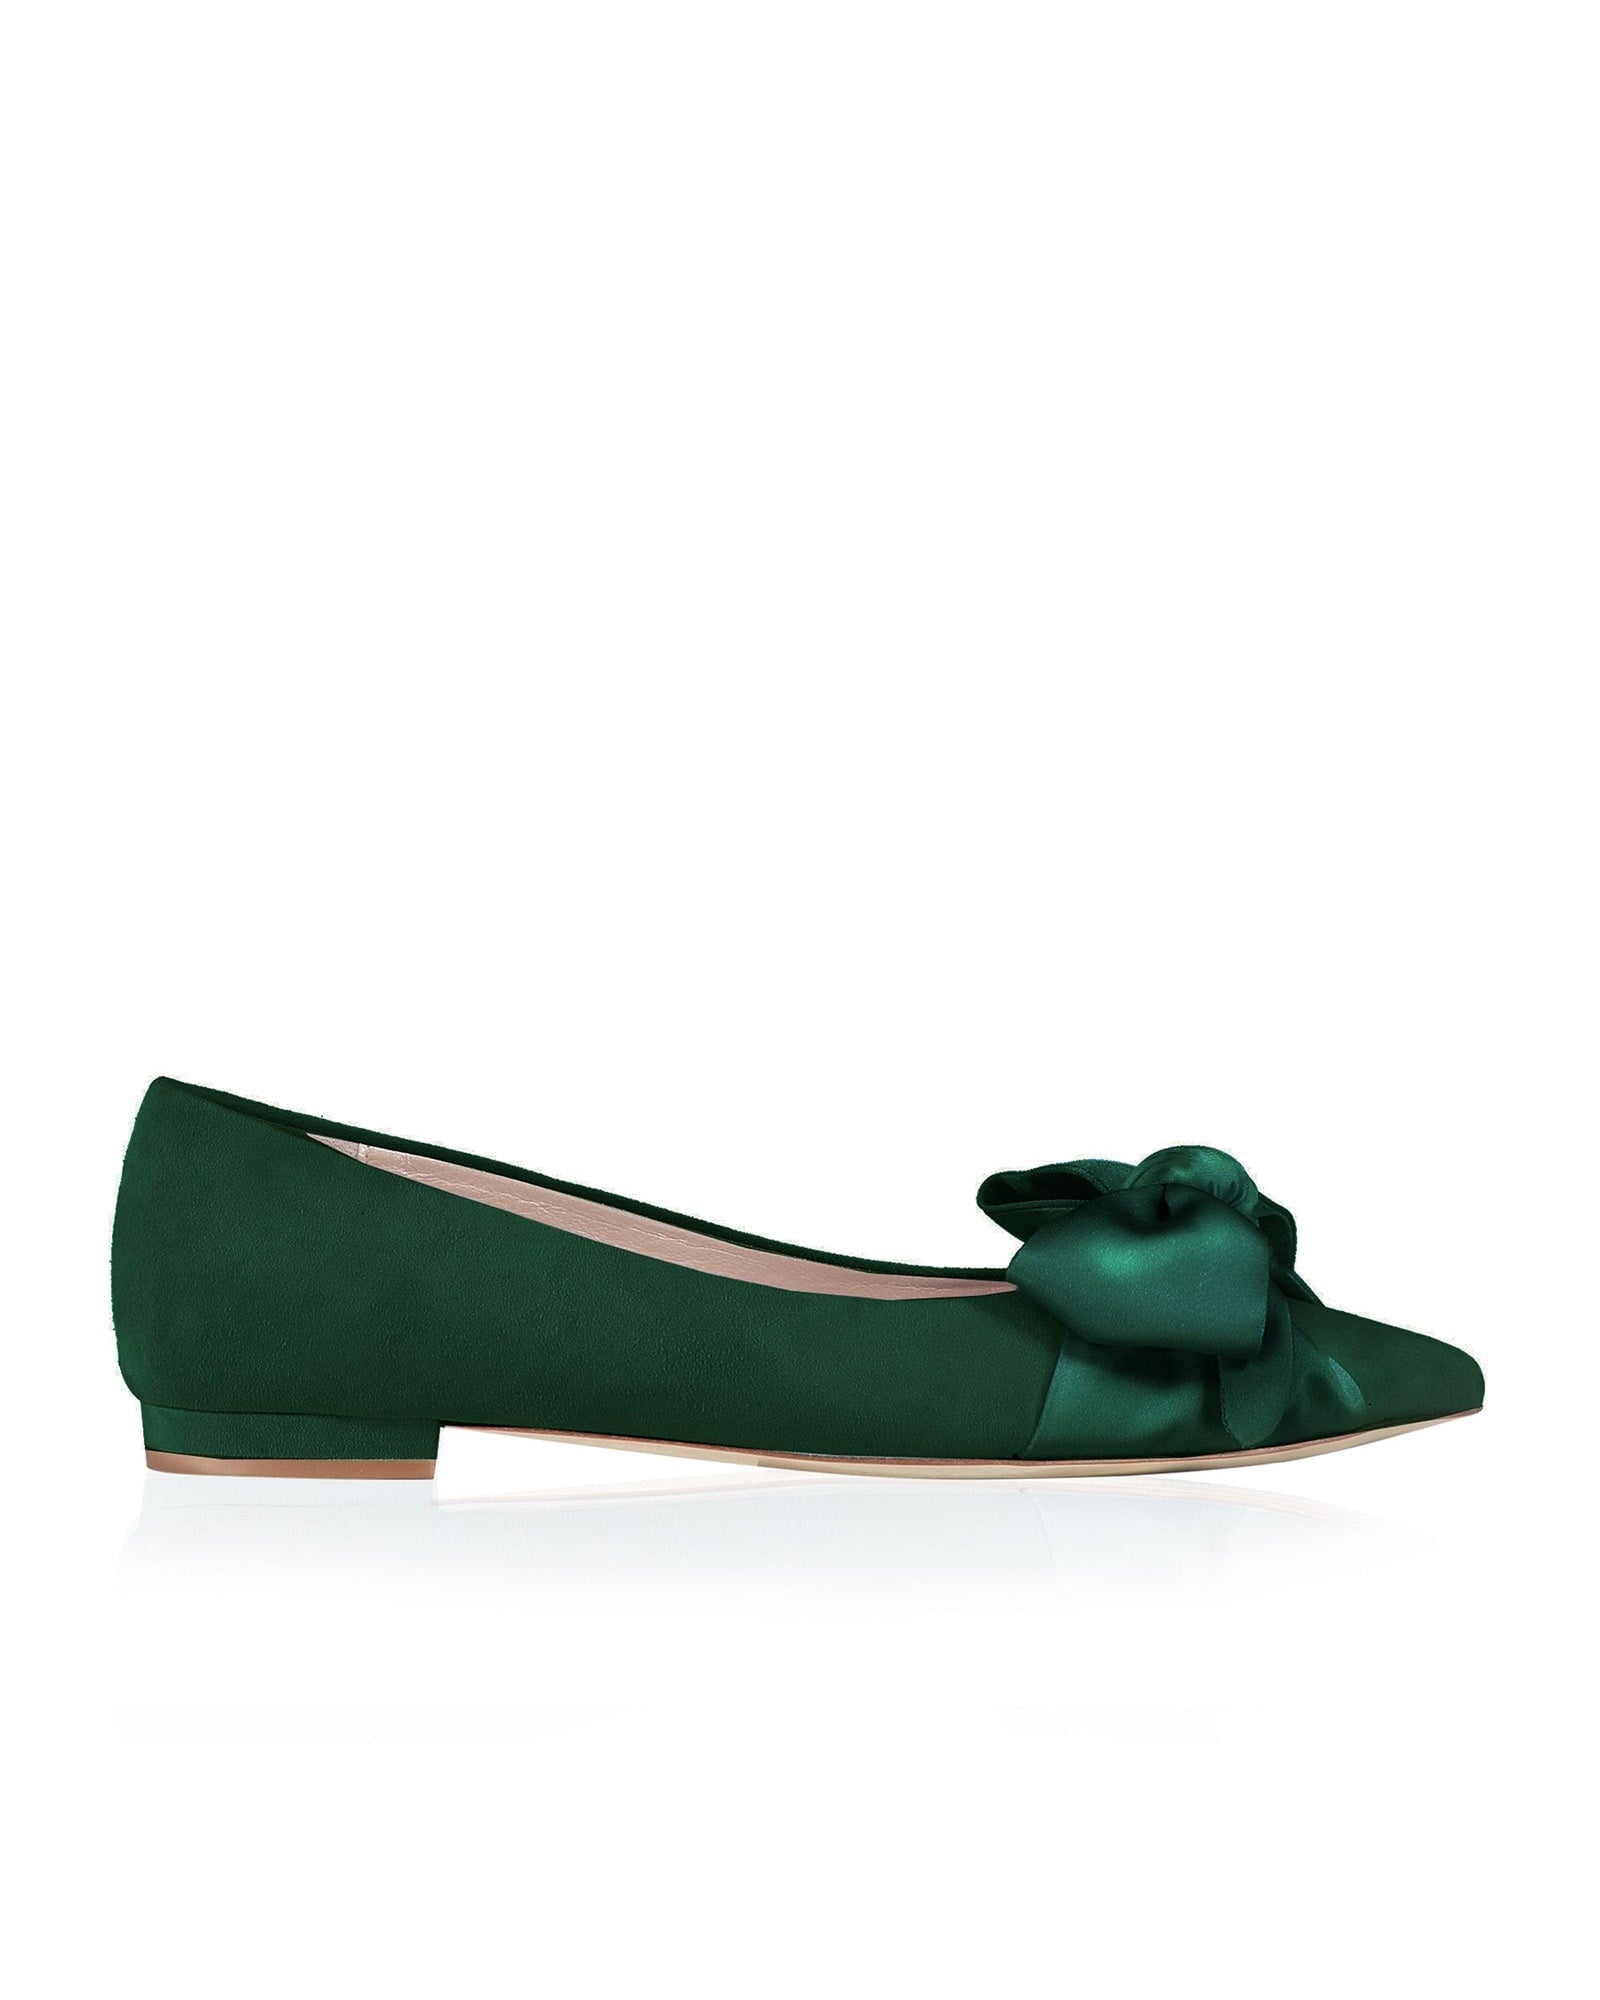 Florence Flat Greenery Fashion Shoe Green Suede Flat Shoe with Satin Bow  image